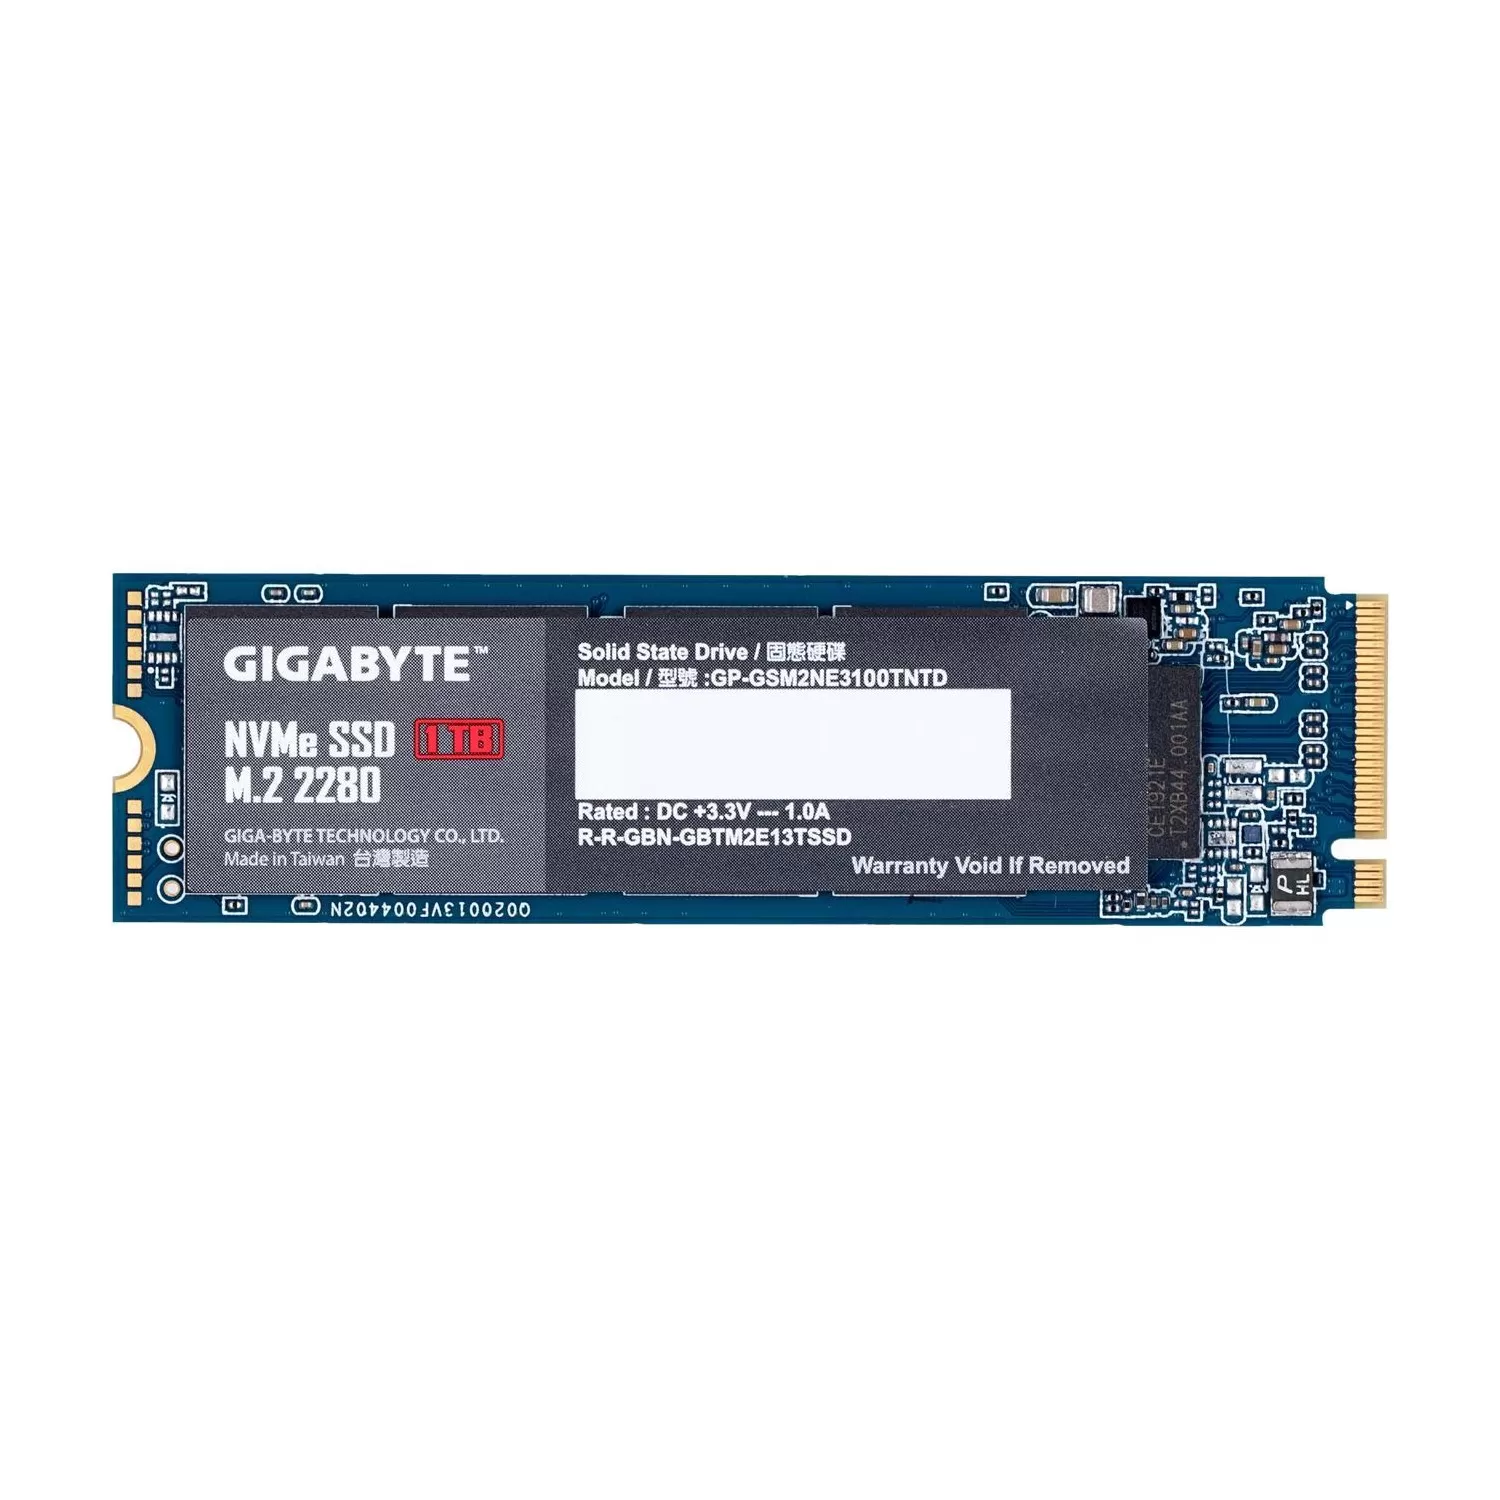 Gigabyte-1TB-NVMe-M.2-Solid-State-Drive-SSD-1